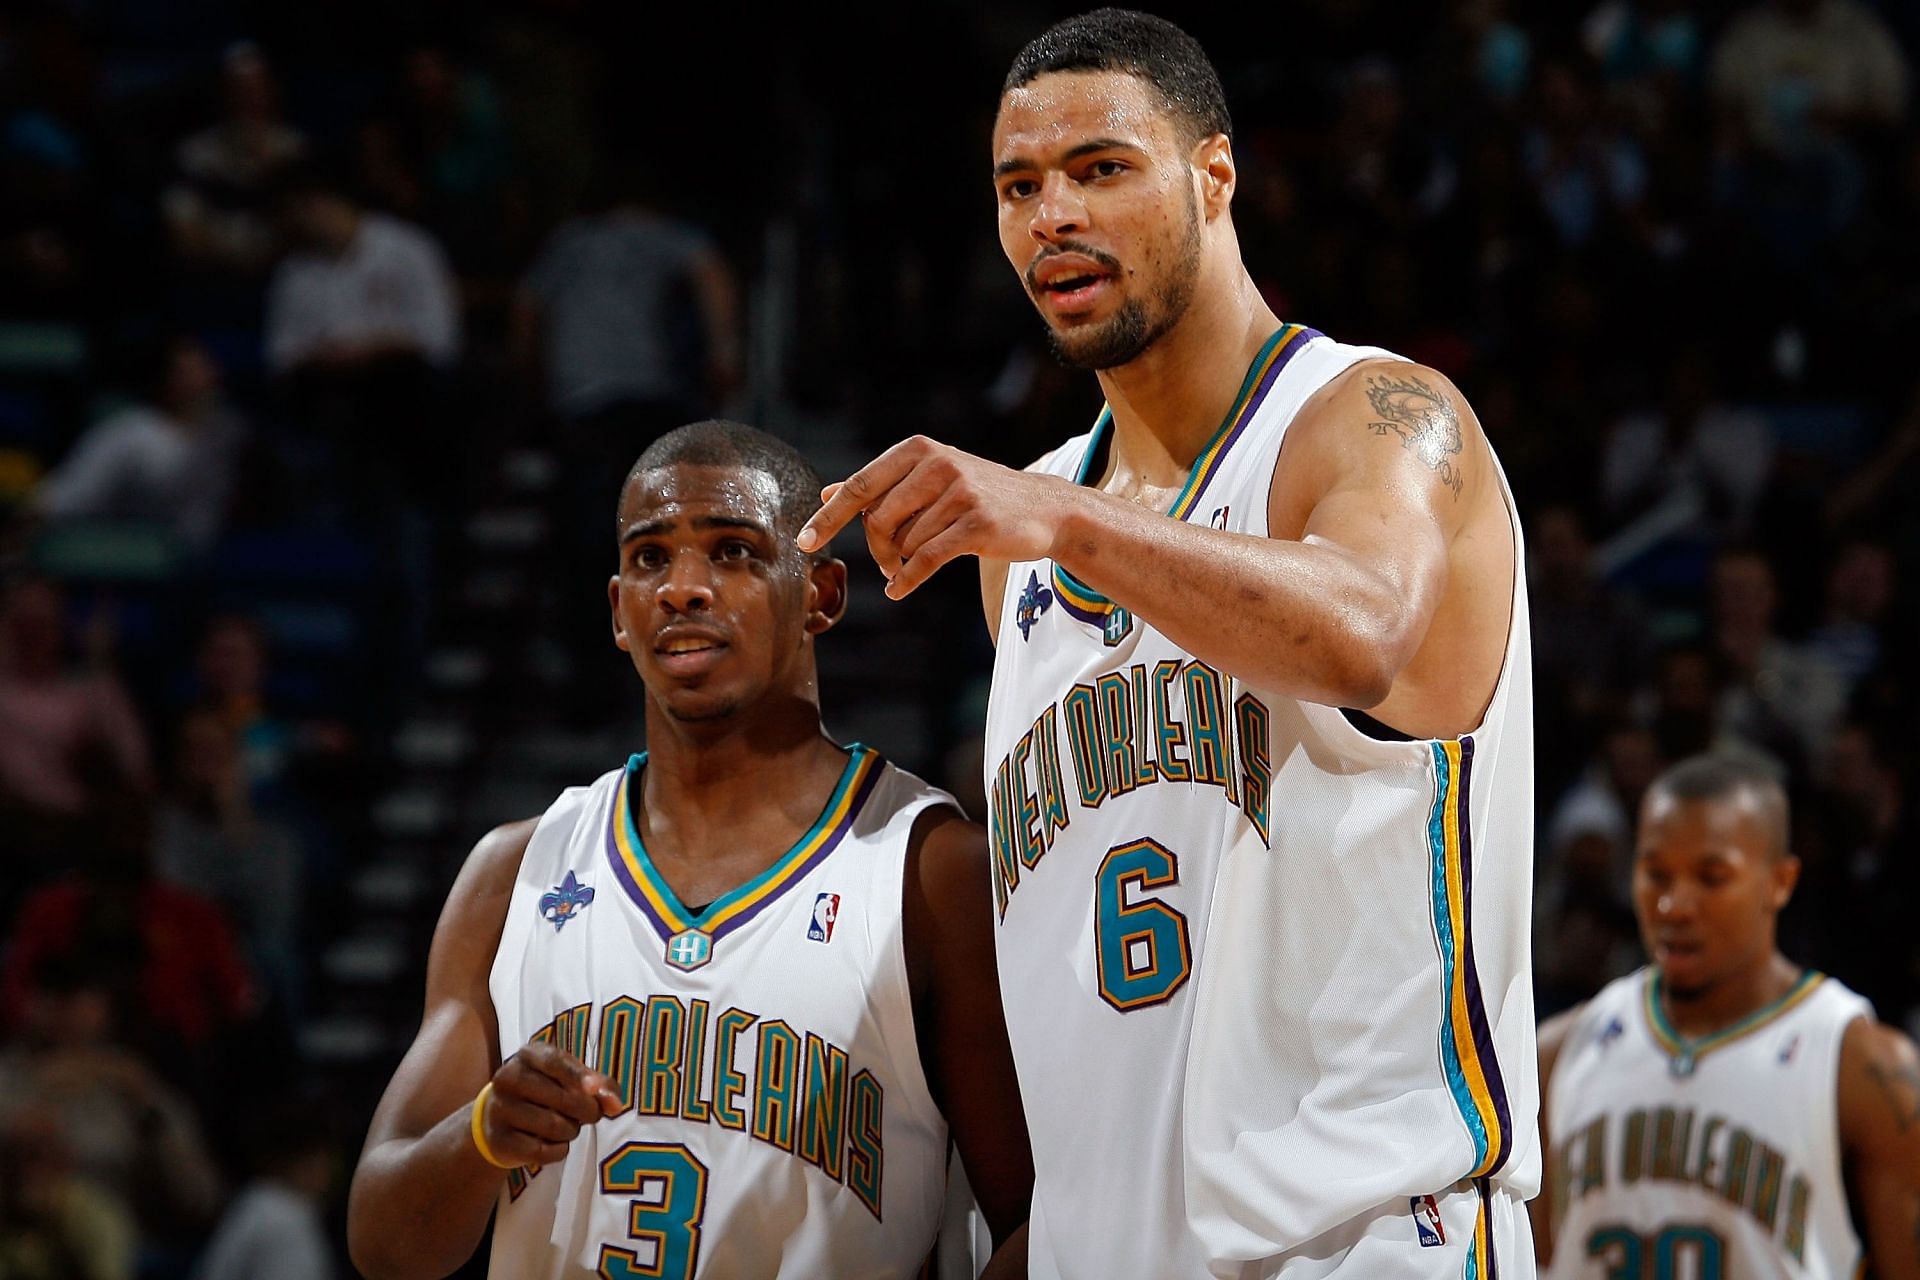 Chris Paul #3 talks with Tyson Chandler #6 of the New Orleans Hornets during the game against the Milwaukee Bucks